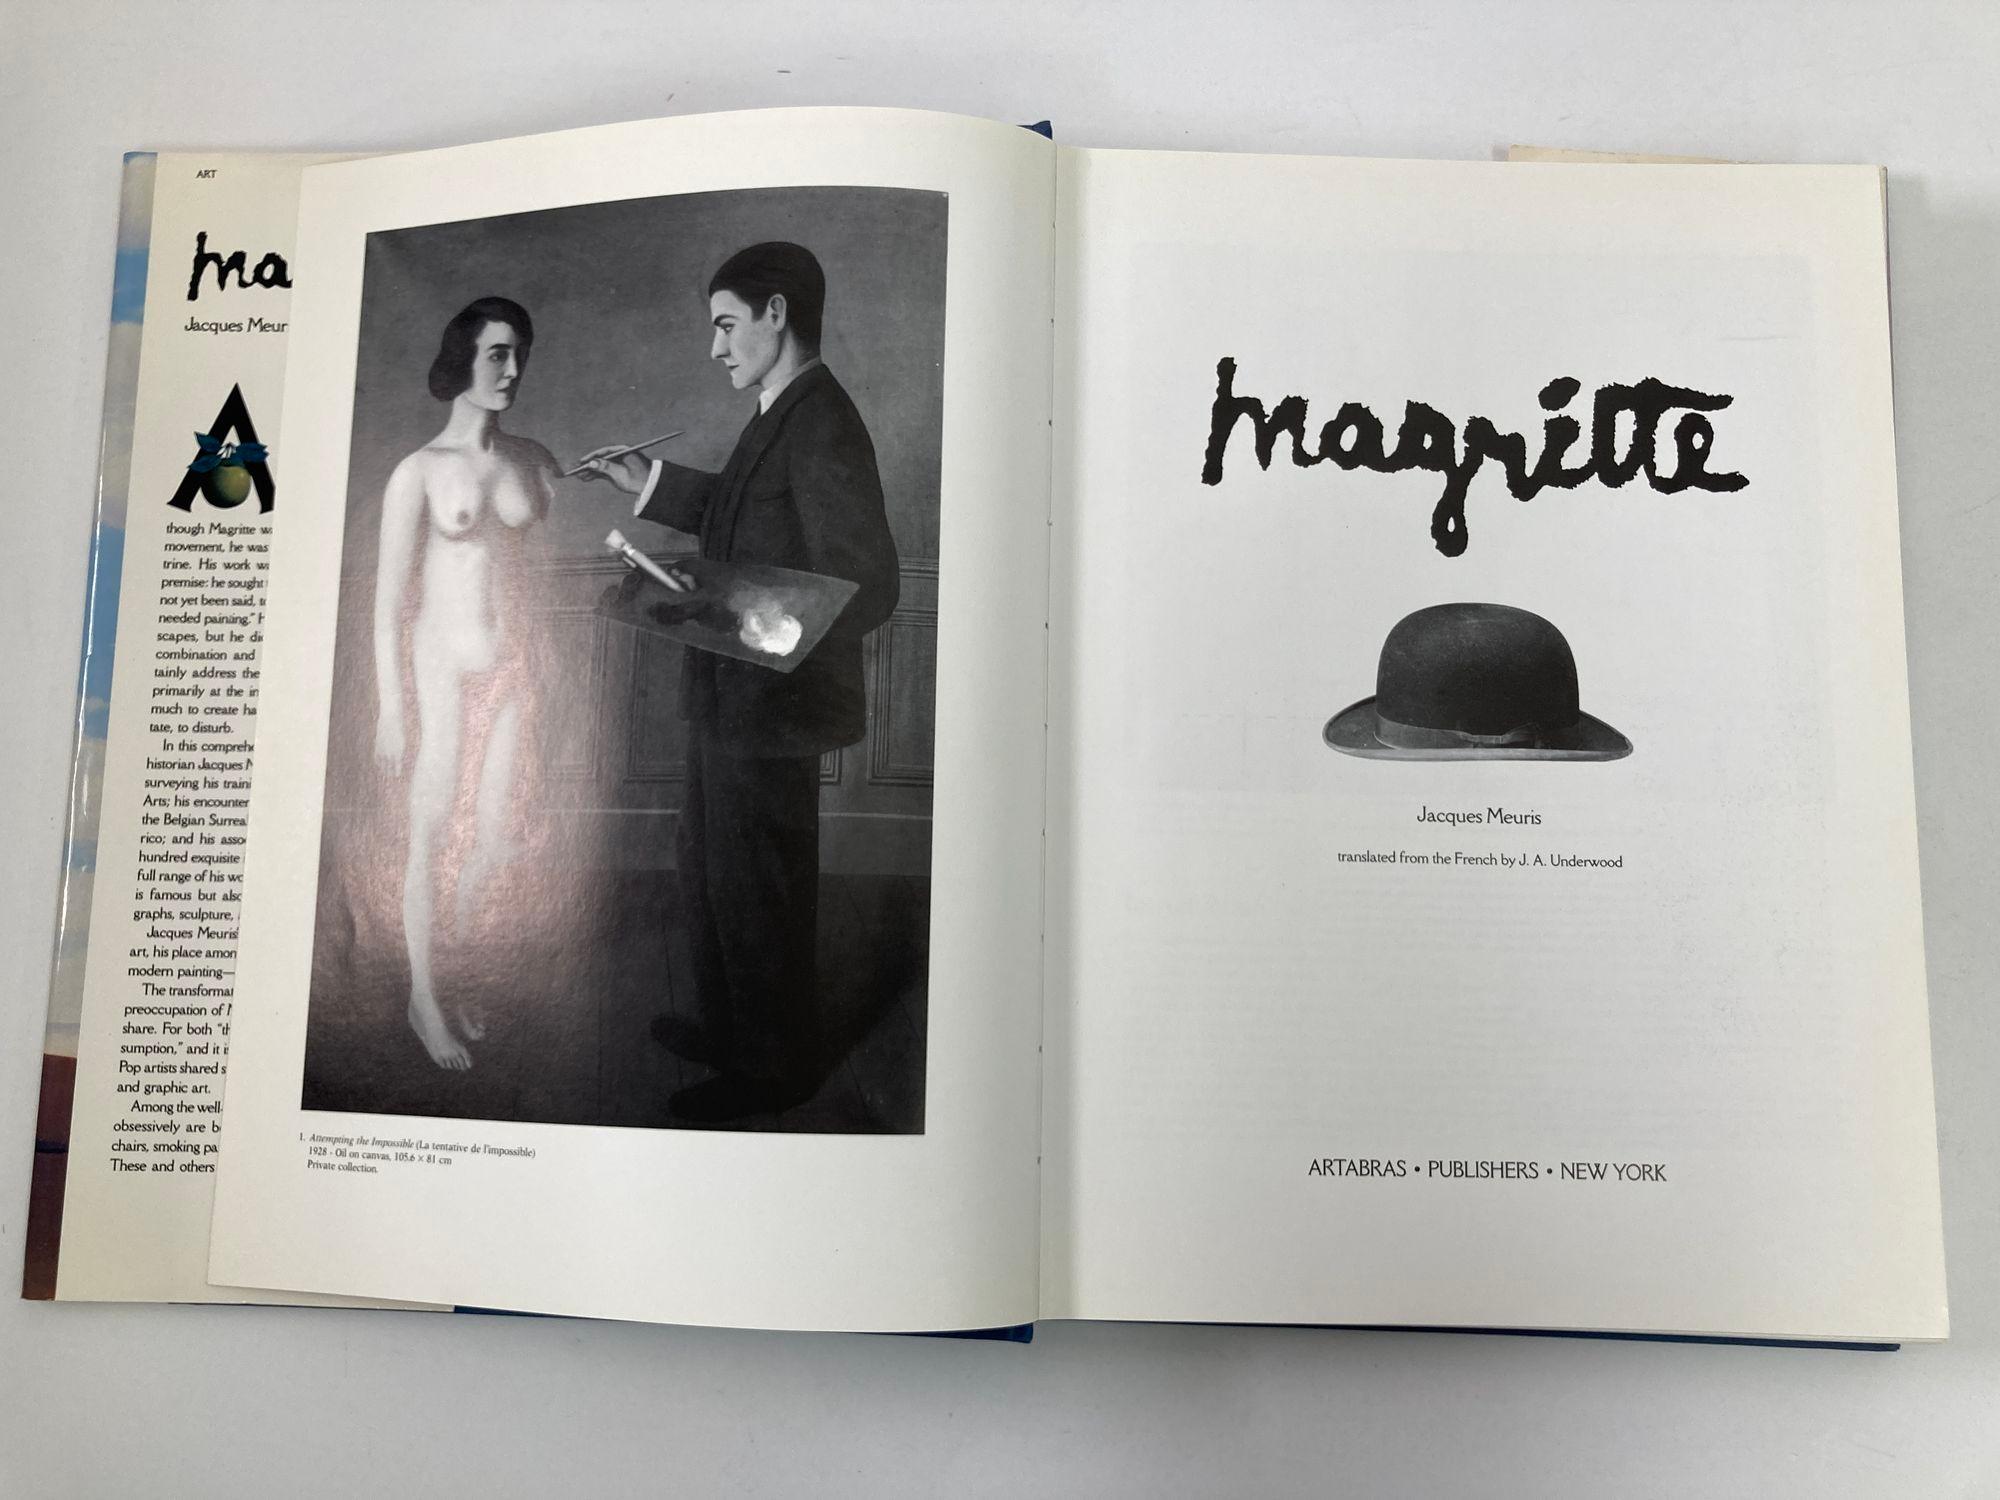 Magritte by Jacques Meuris 1988 1st Edition.
First American Edition. Hardcover.
Near Fine in Near Fine dust jacket.
233pp 393 illustrations.
Blue boards in dust jacket.
Translated from the French by J. A. Underwood.
Title: Magritte
Publisher: